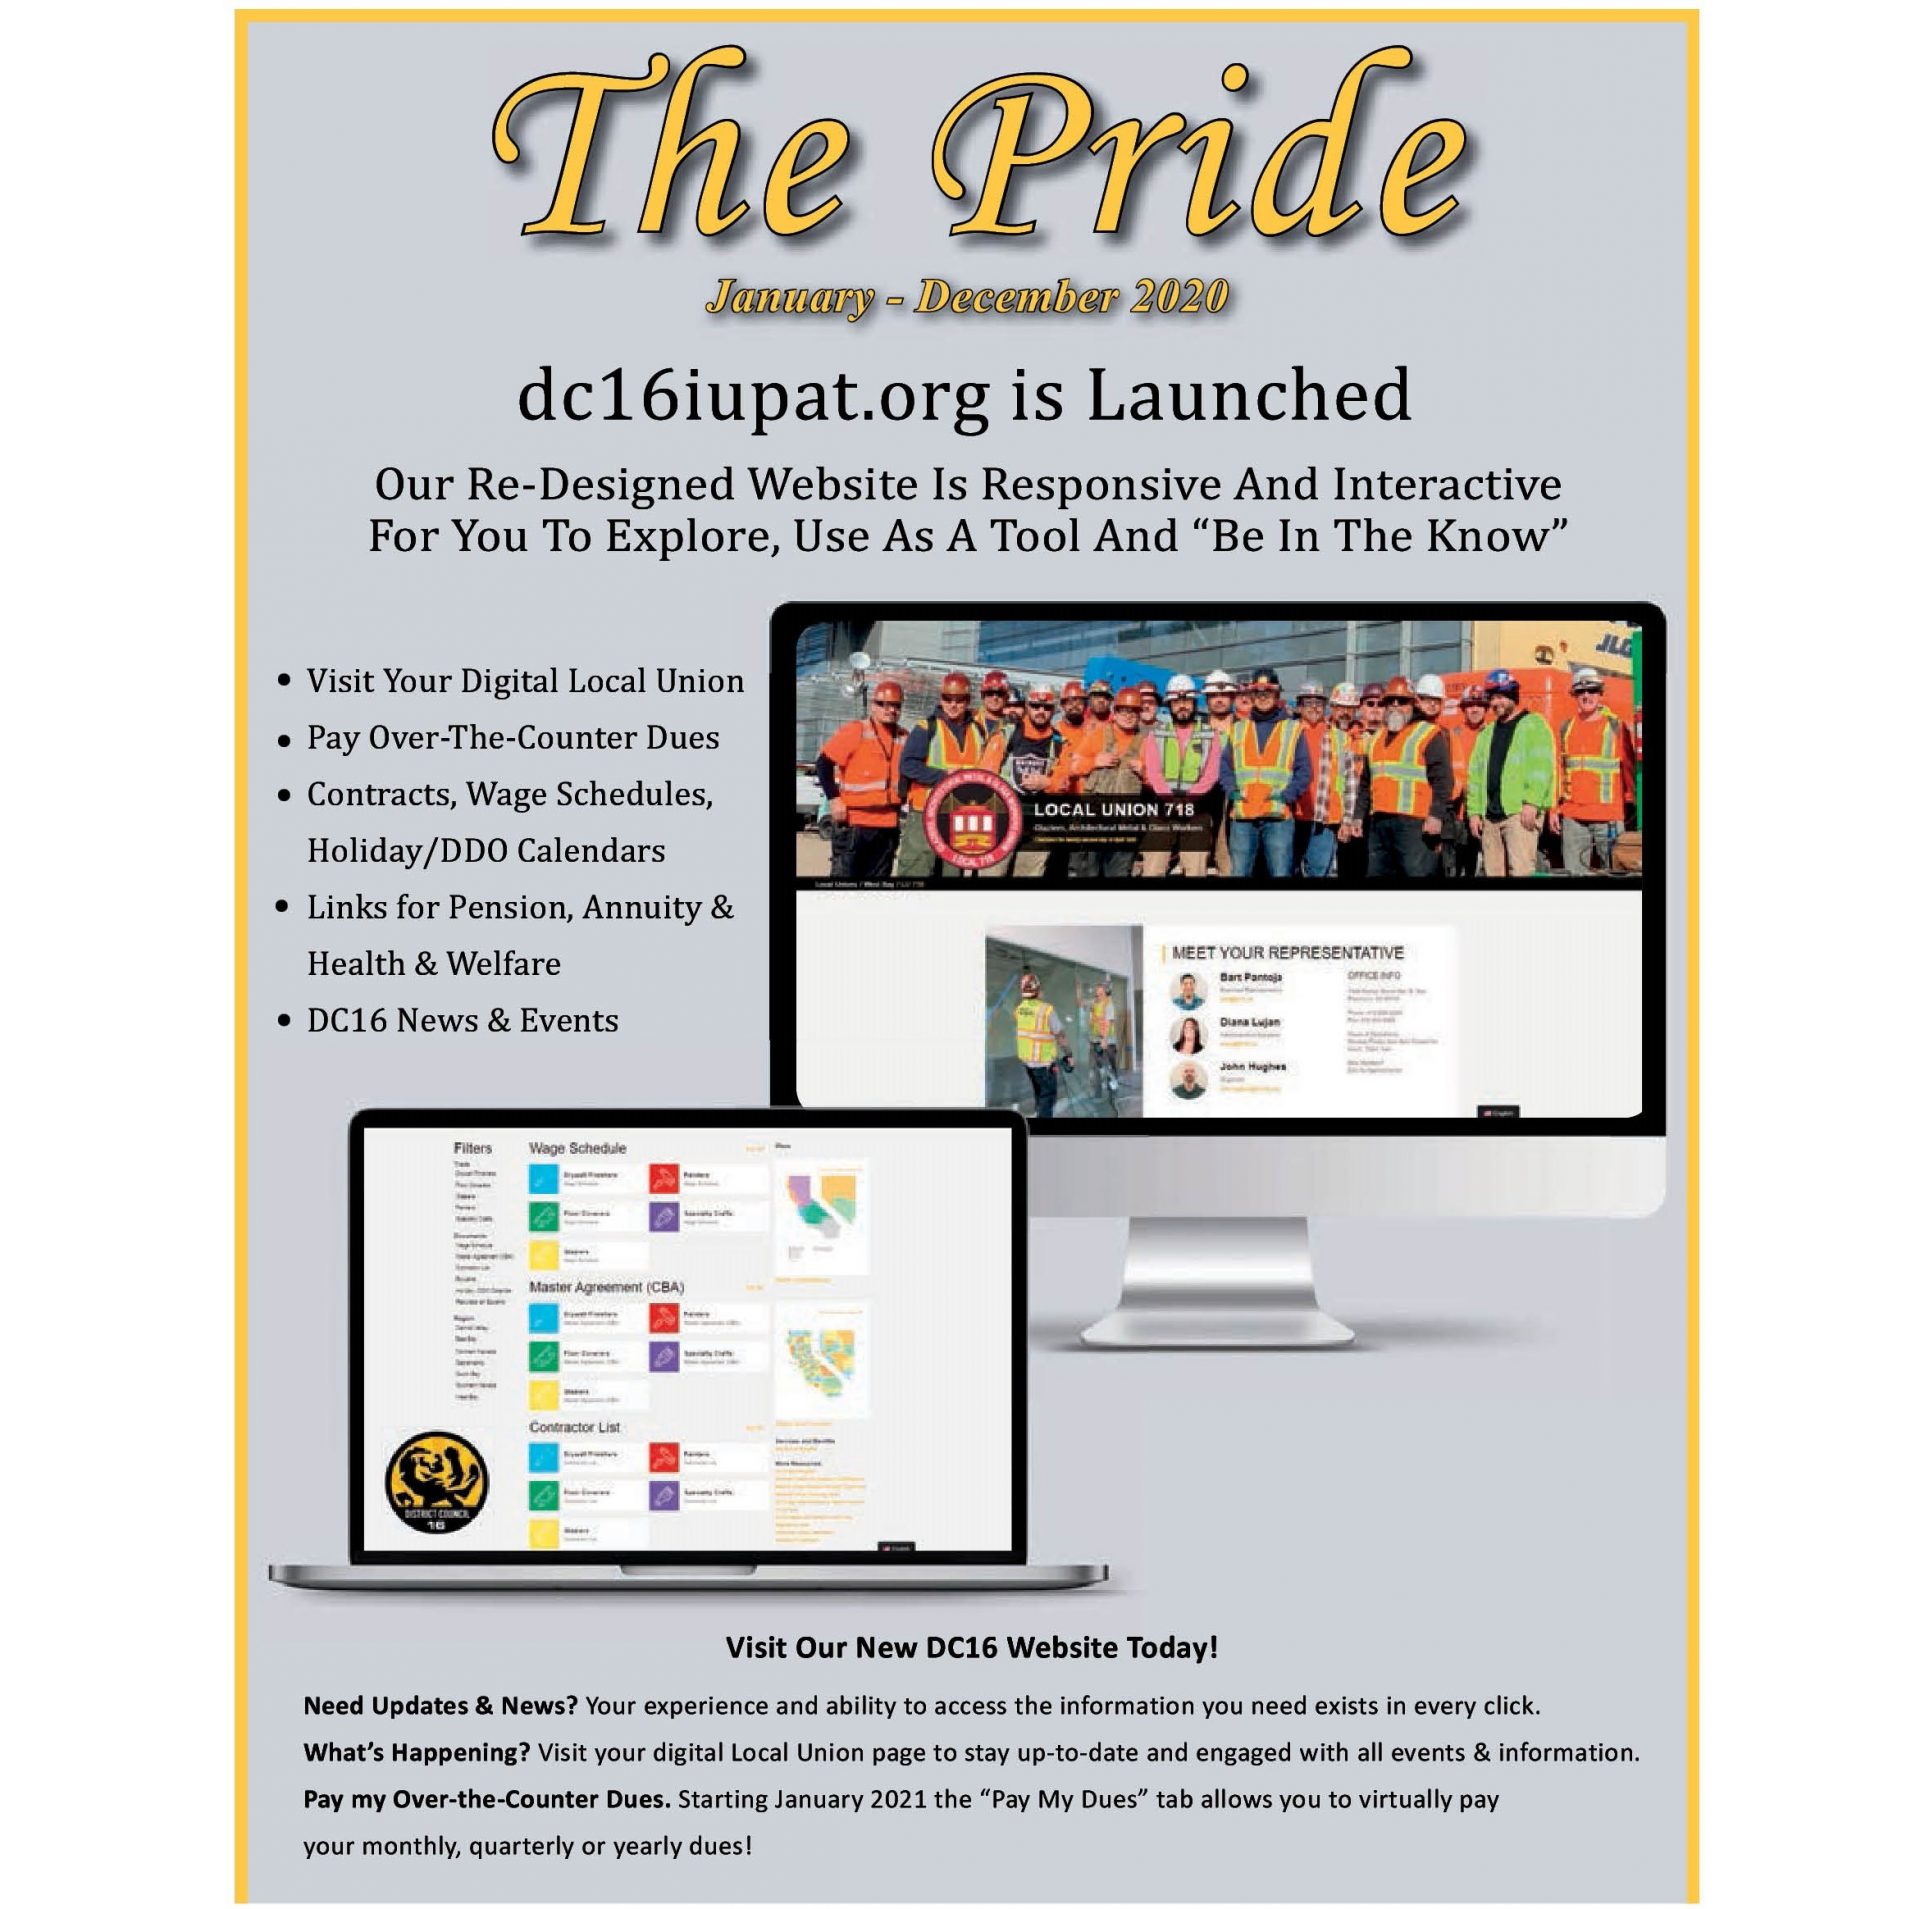 Image from the Gallery: THE PRIDE JANUARY – DECEMBER 2020